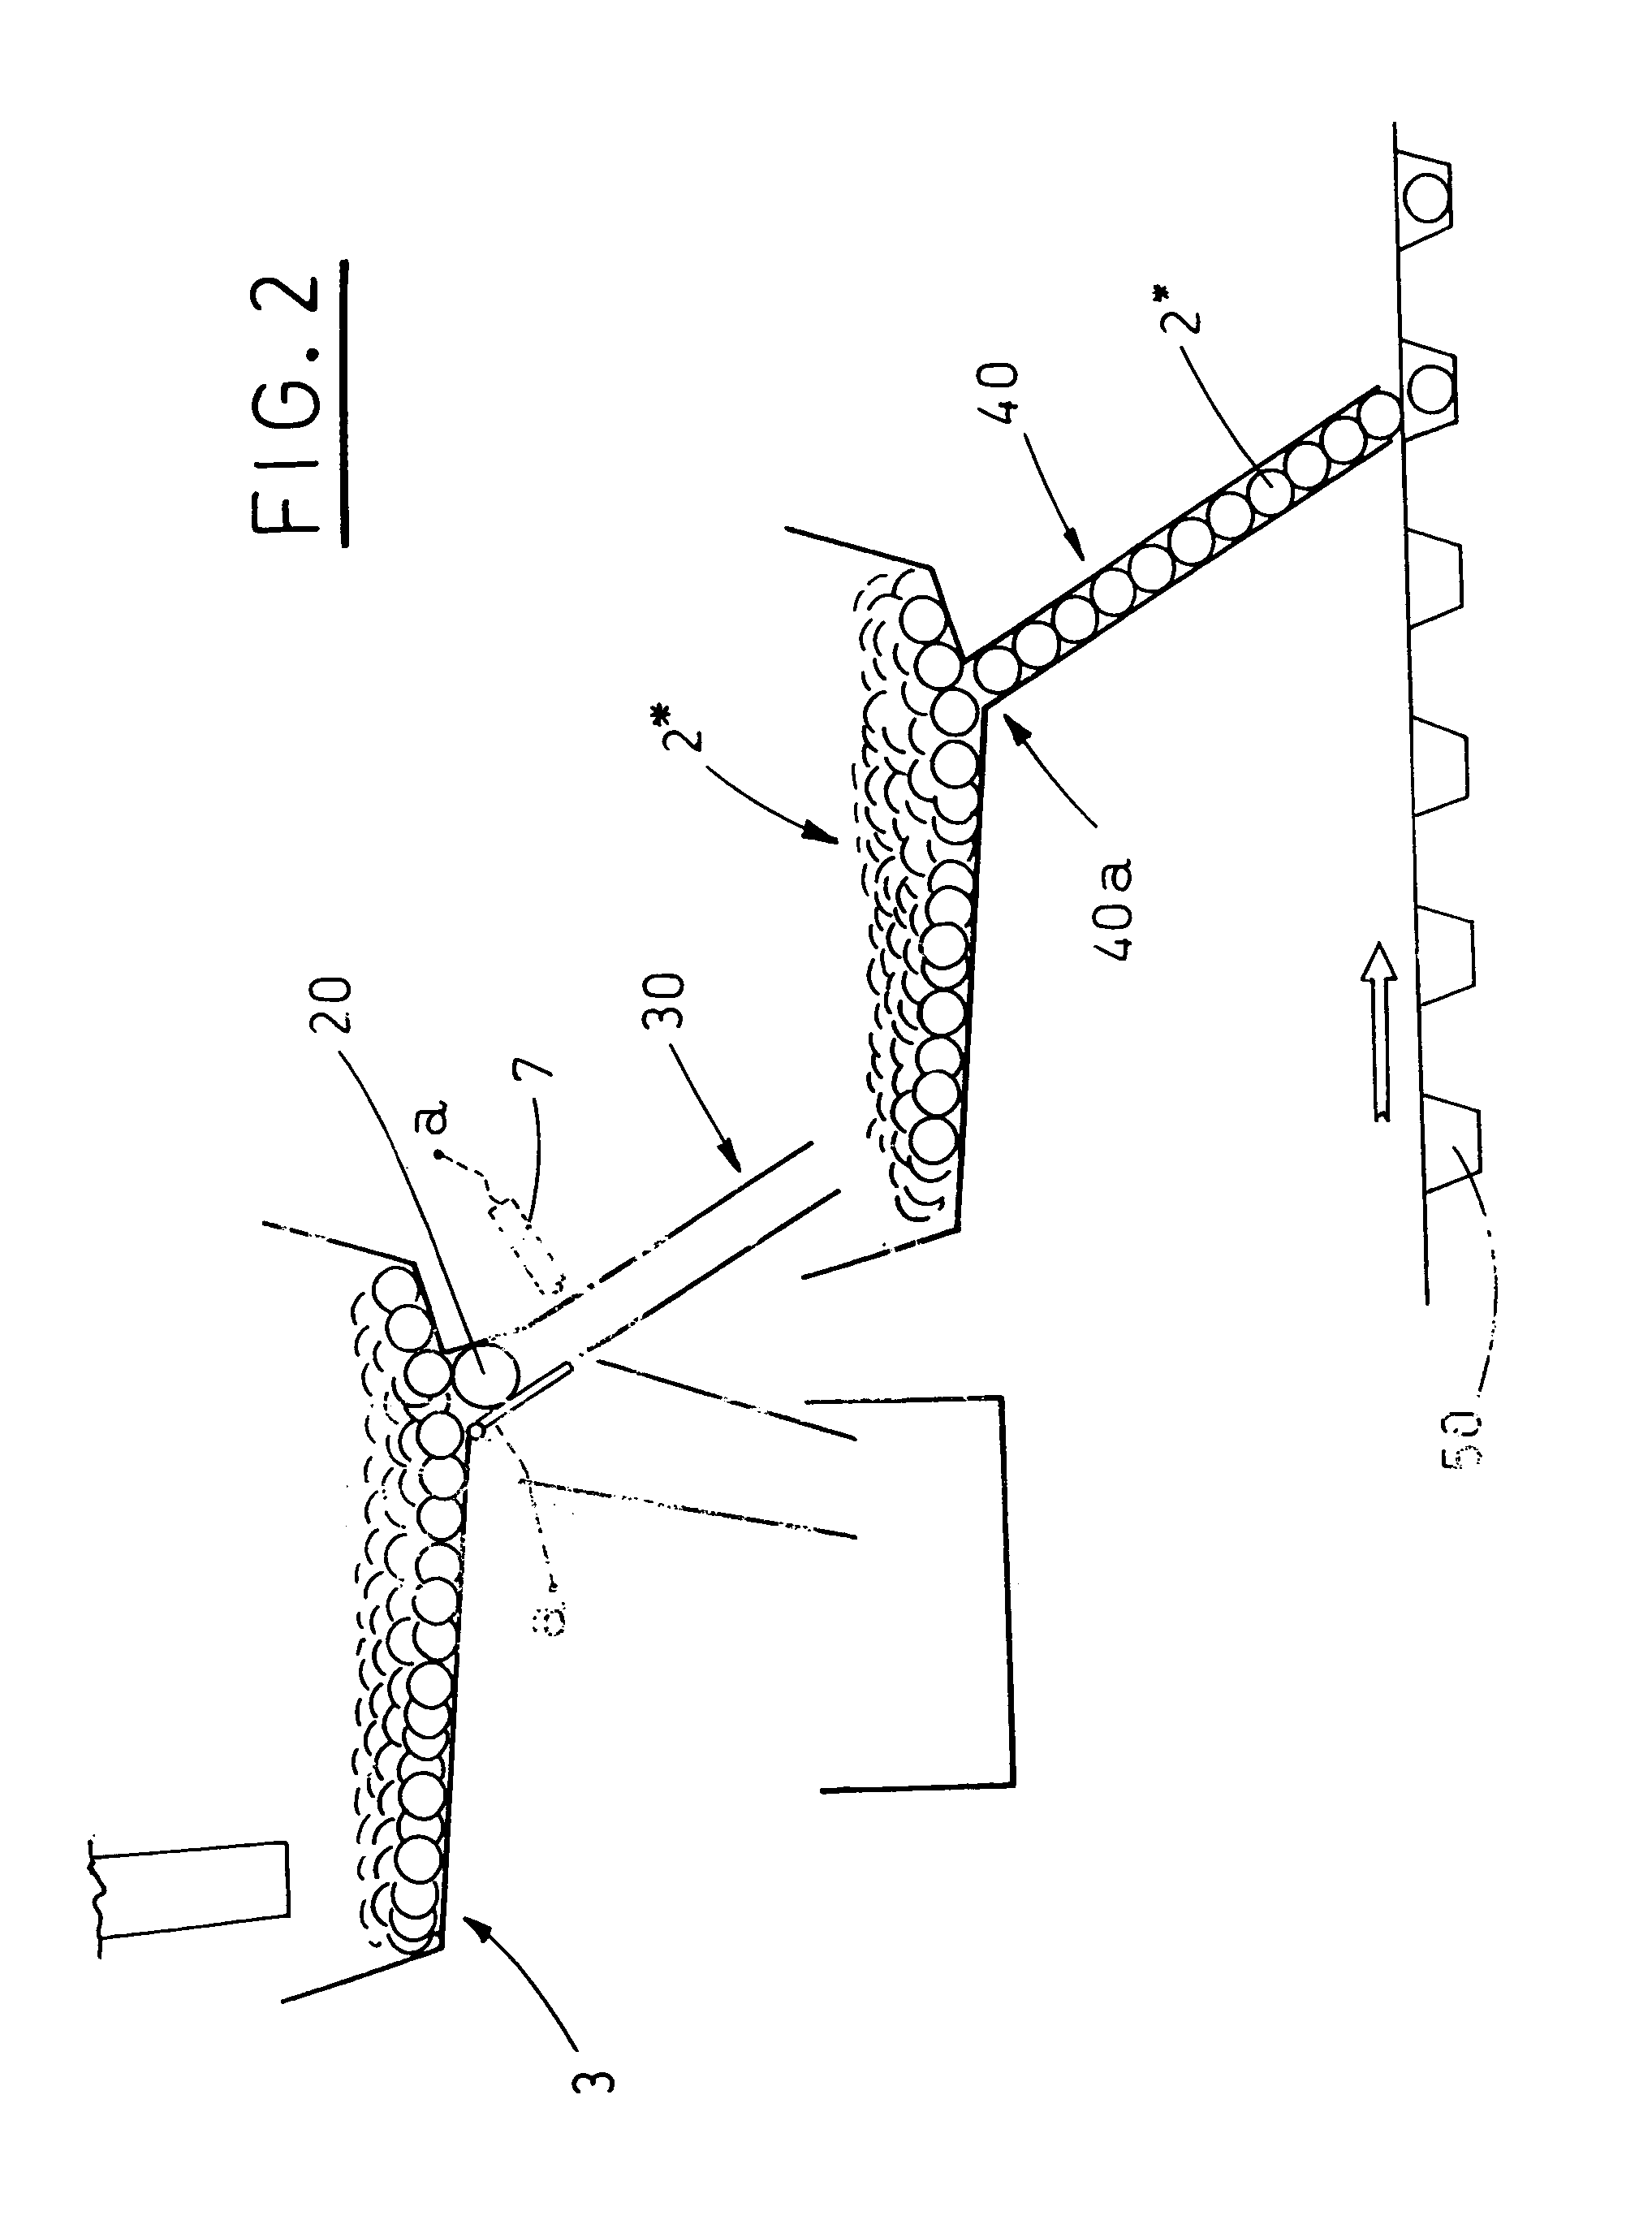 Method and apparatus for selecting and feeding articles